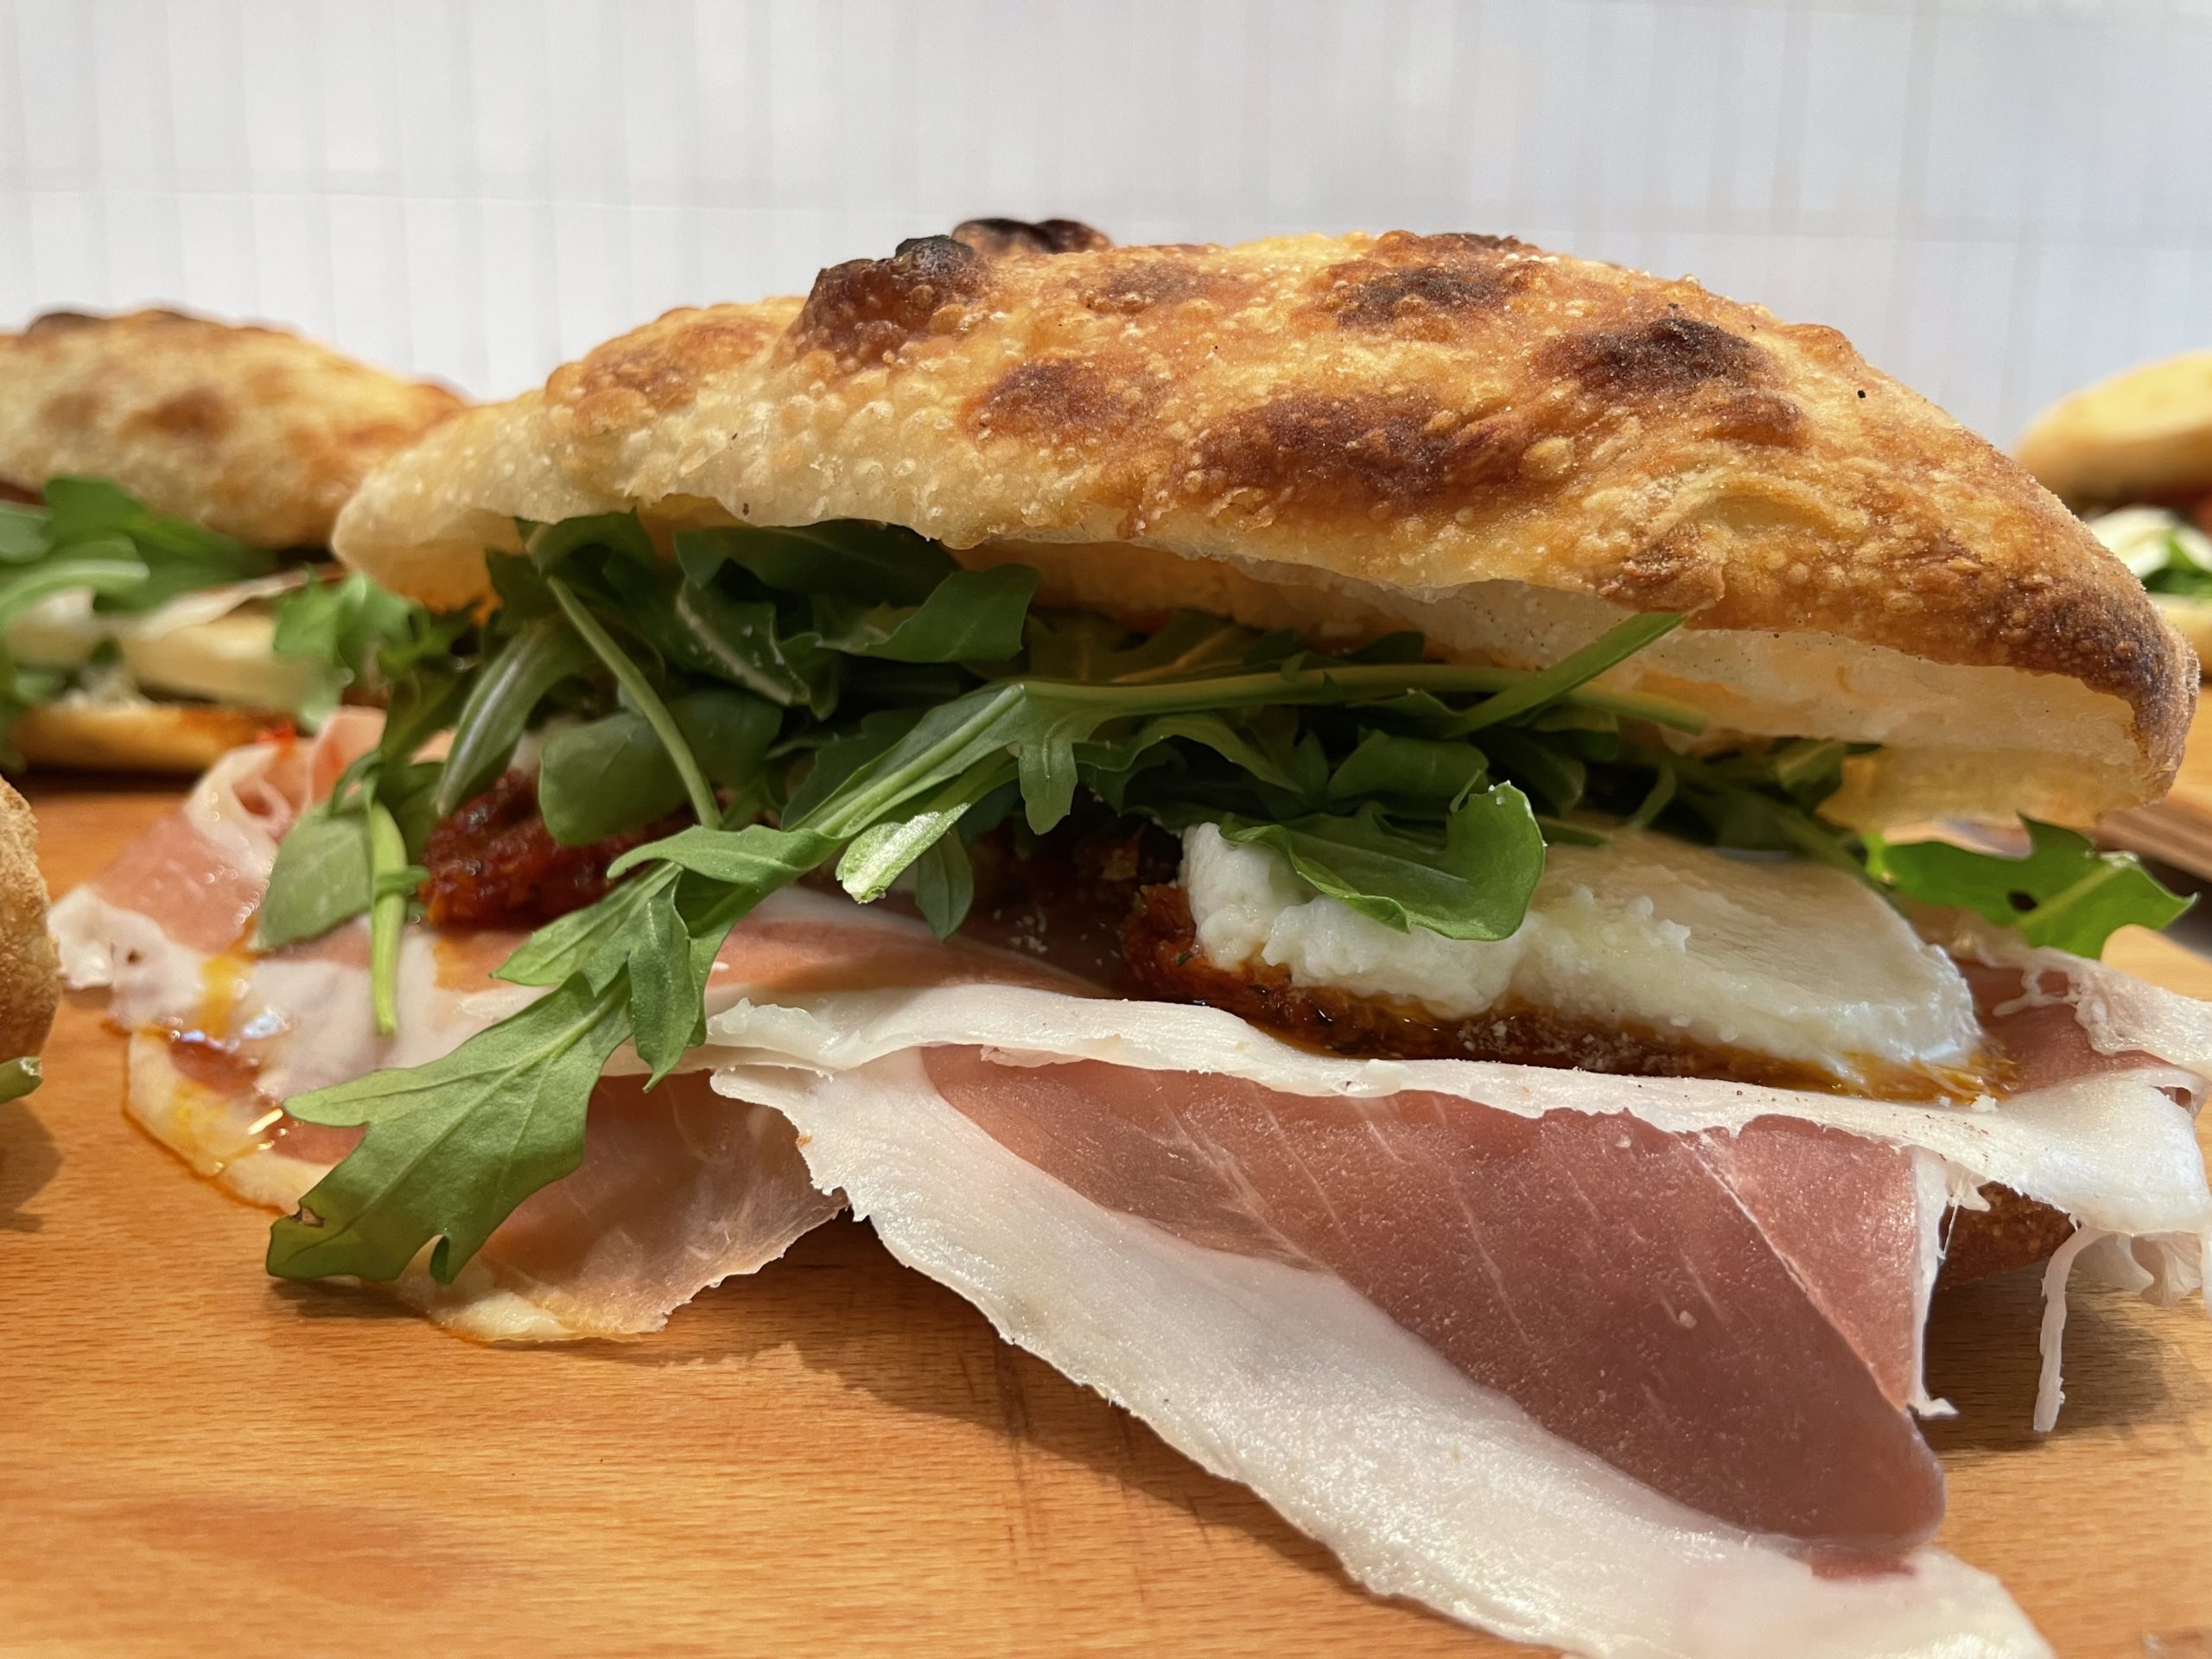 Have you tried our Emiliana sandwich?